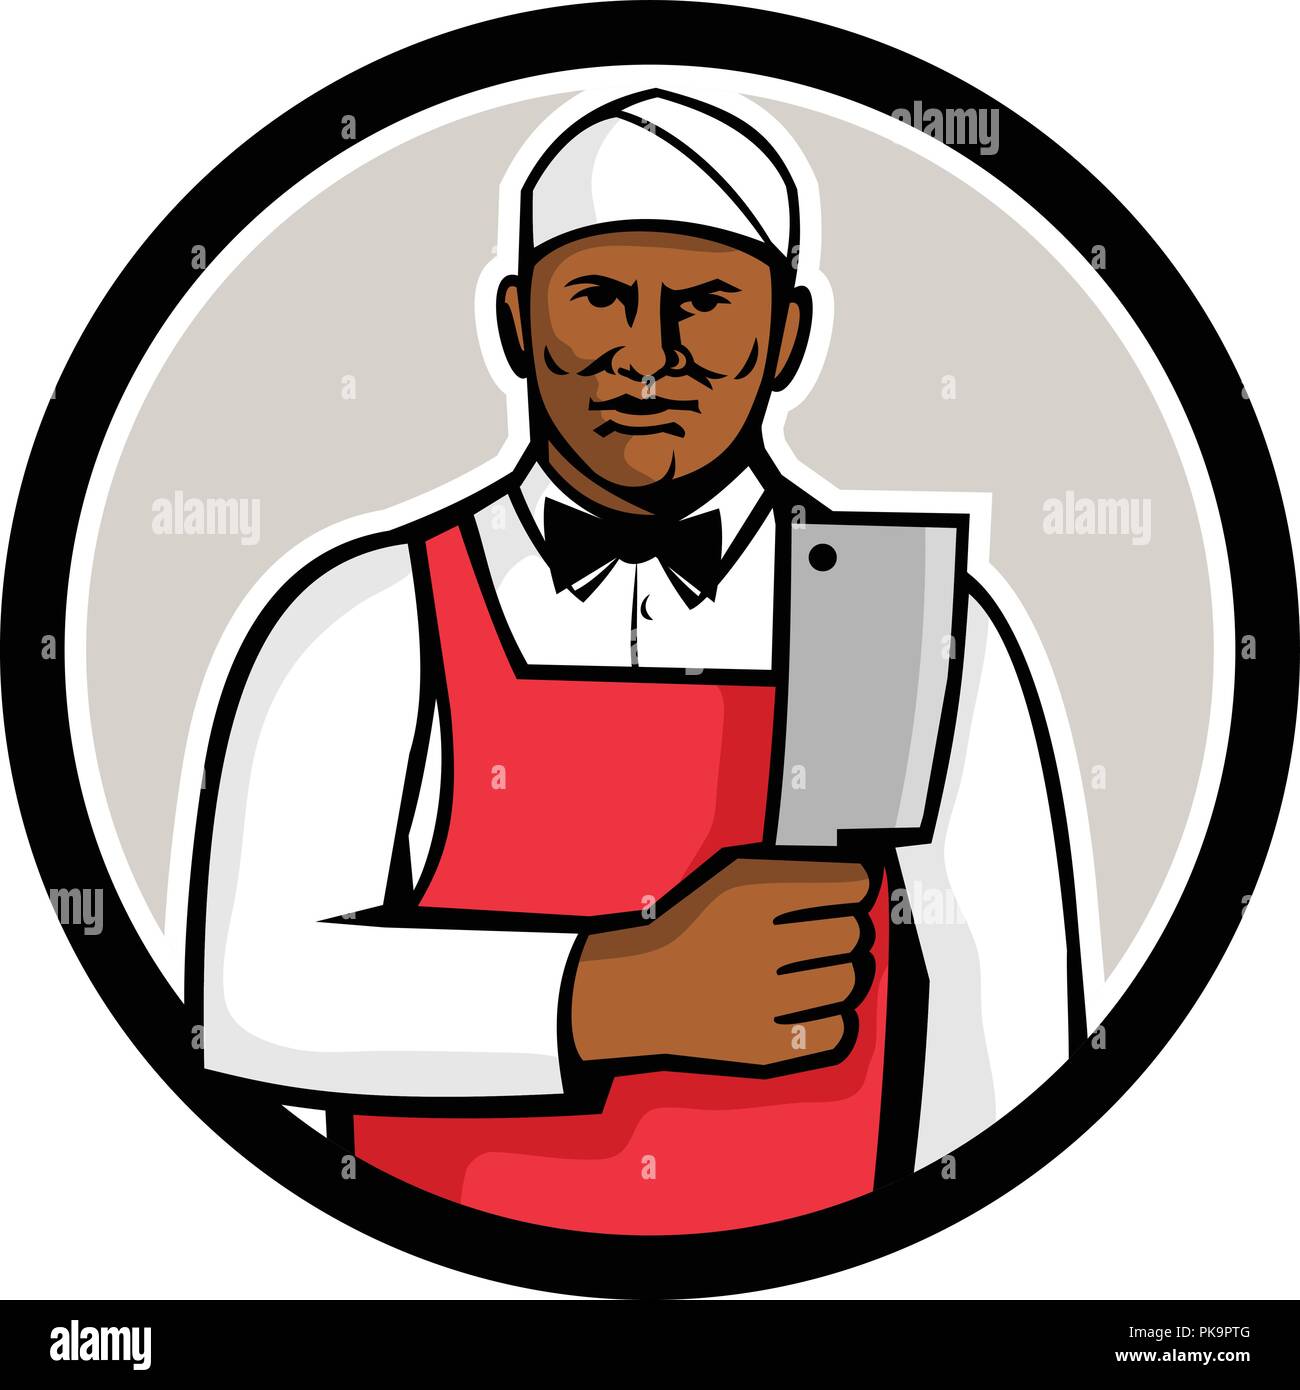 Mascot style illustration of a black African American butcher holding meat cleaver viewed from front set inside circle on isolated white background. Stock Vector